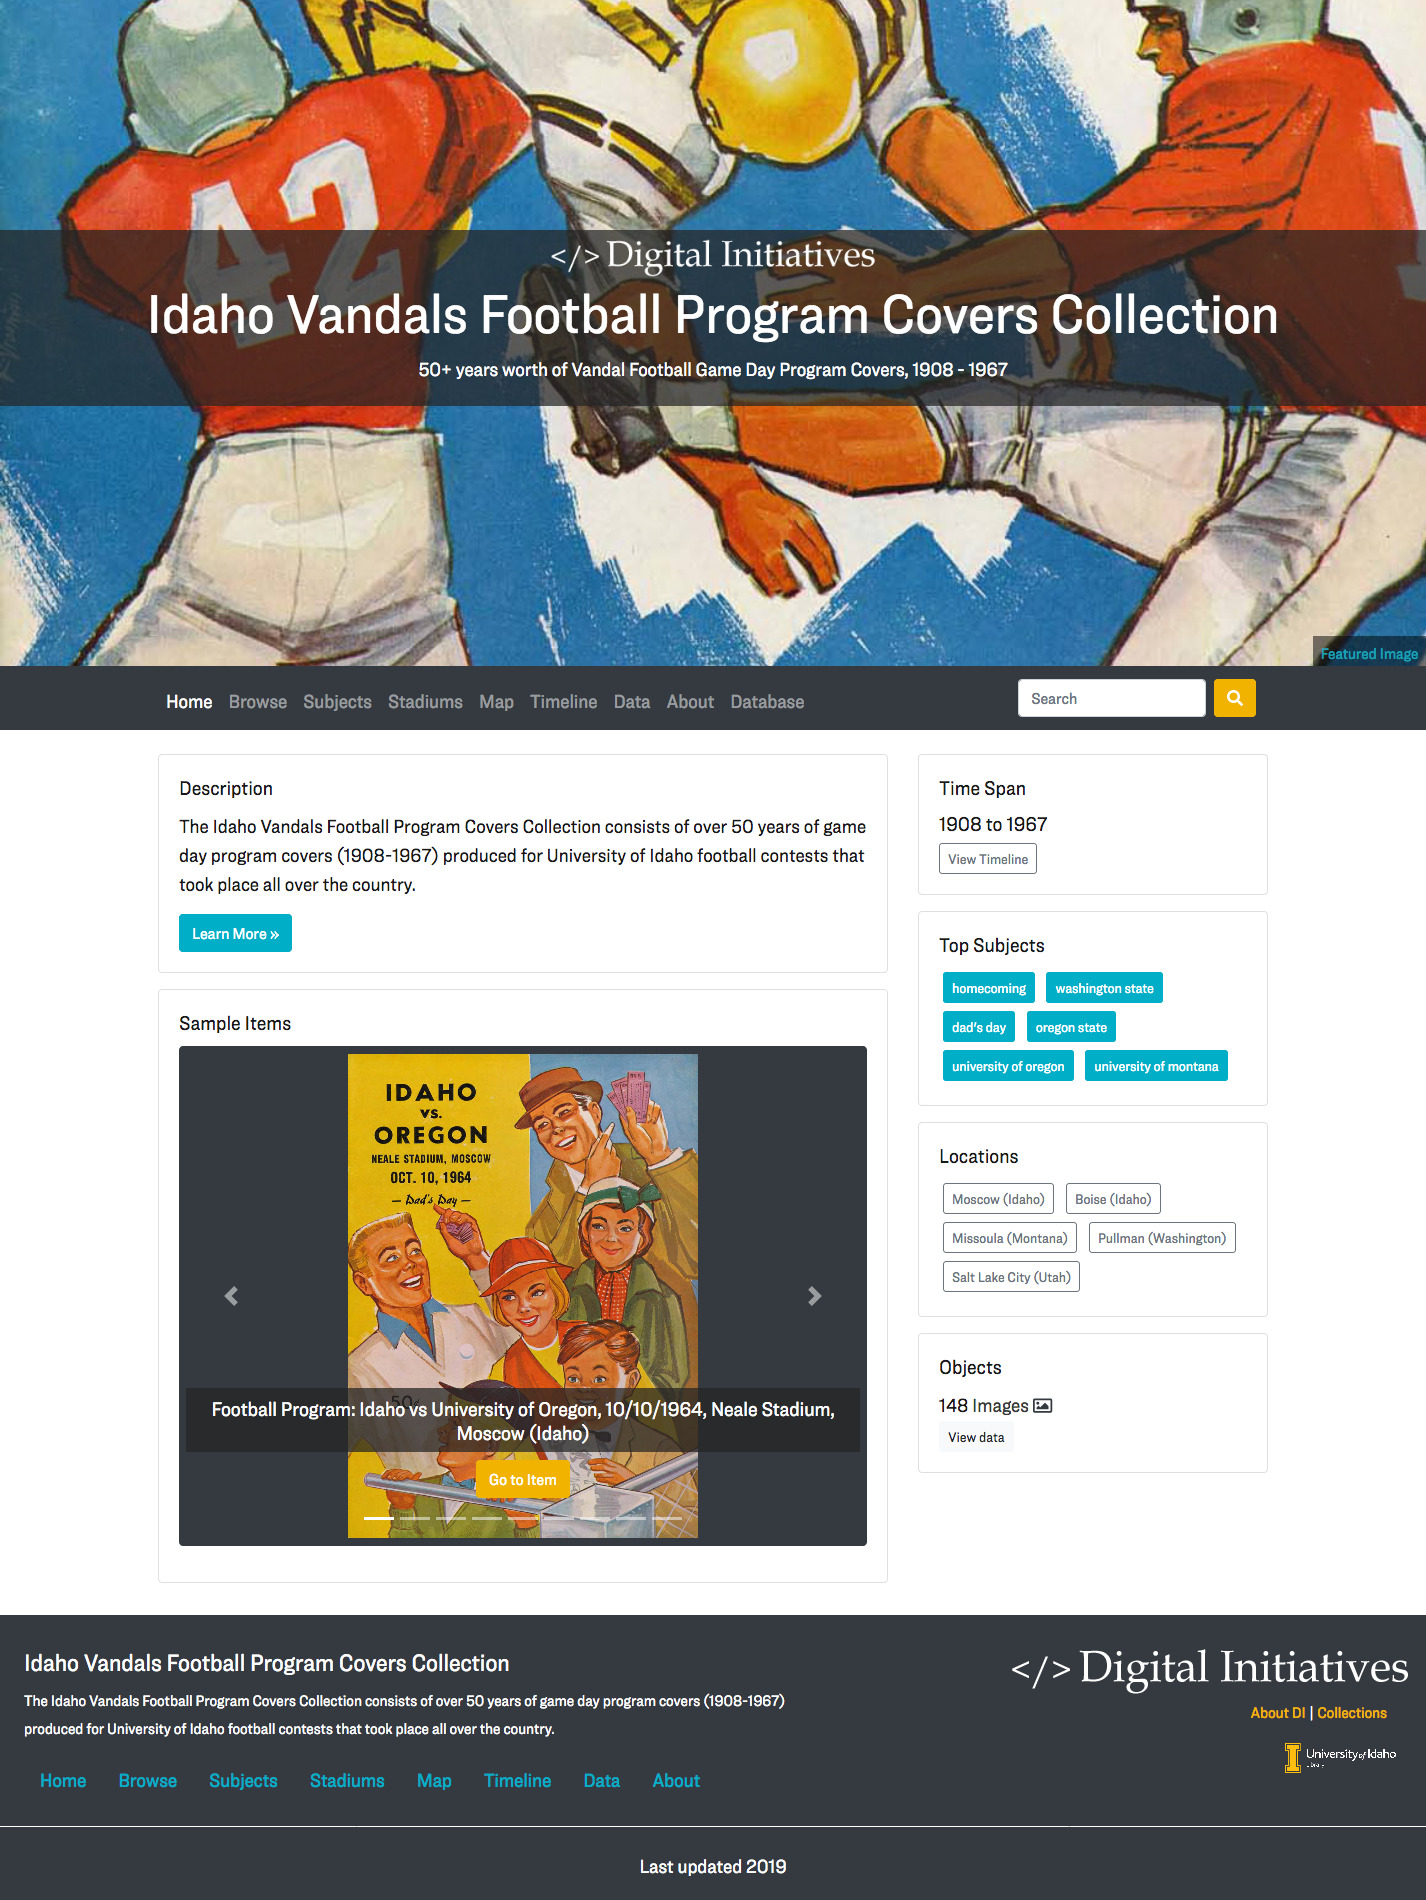 screen shot image of Idaho Vandals Football Covers Collection home page